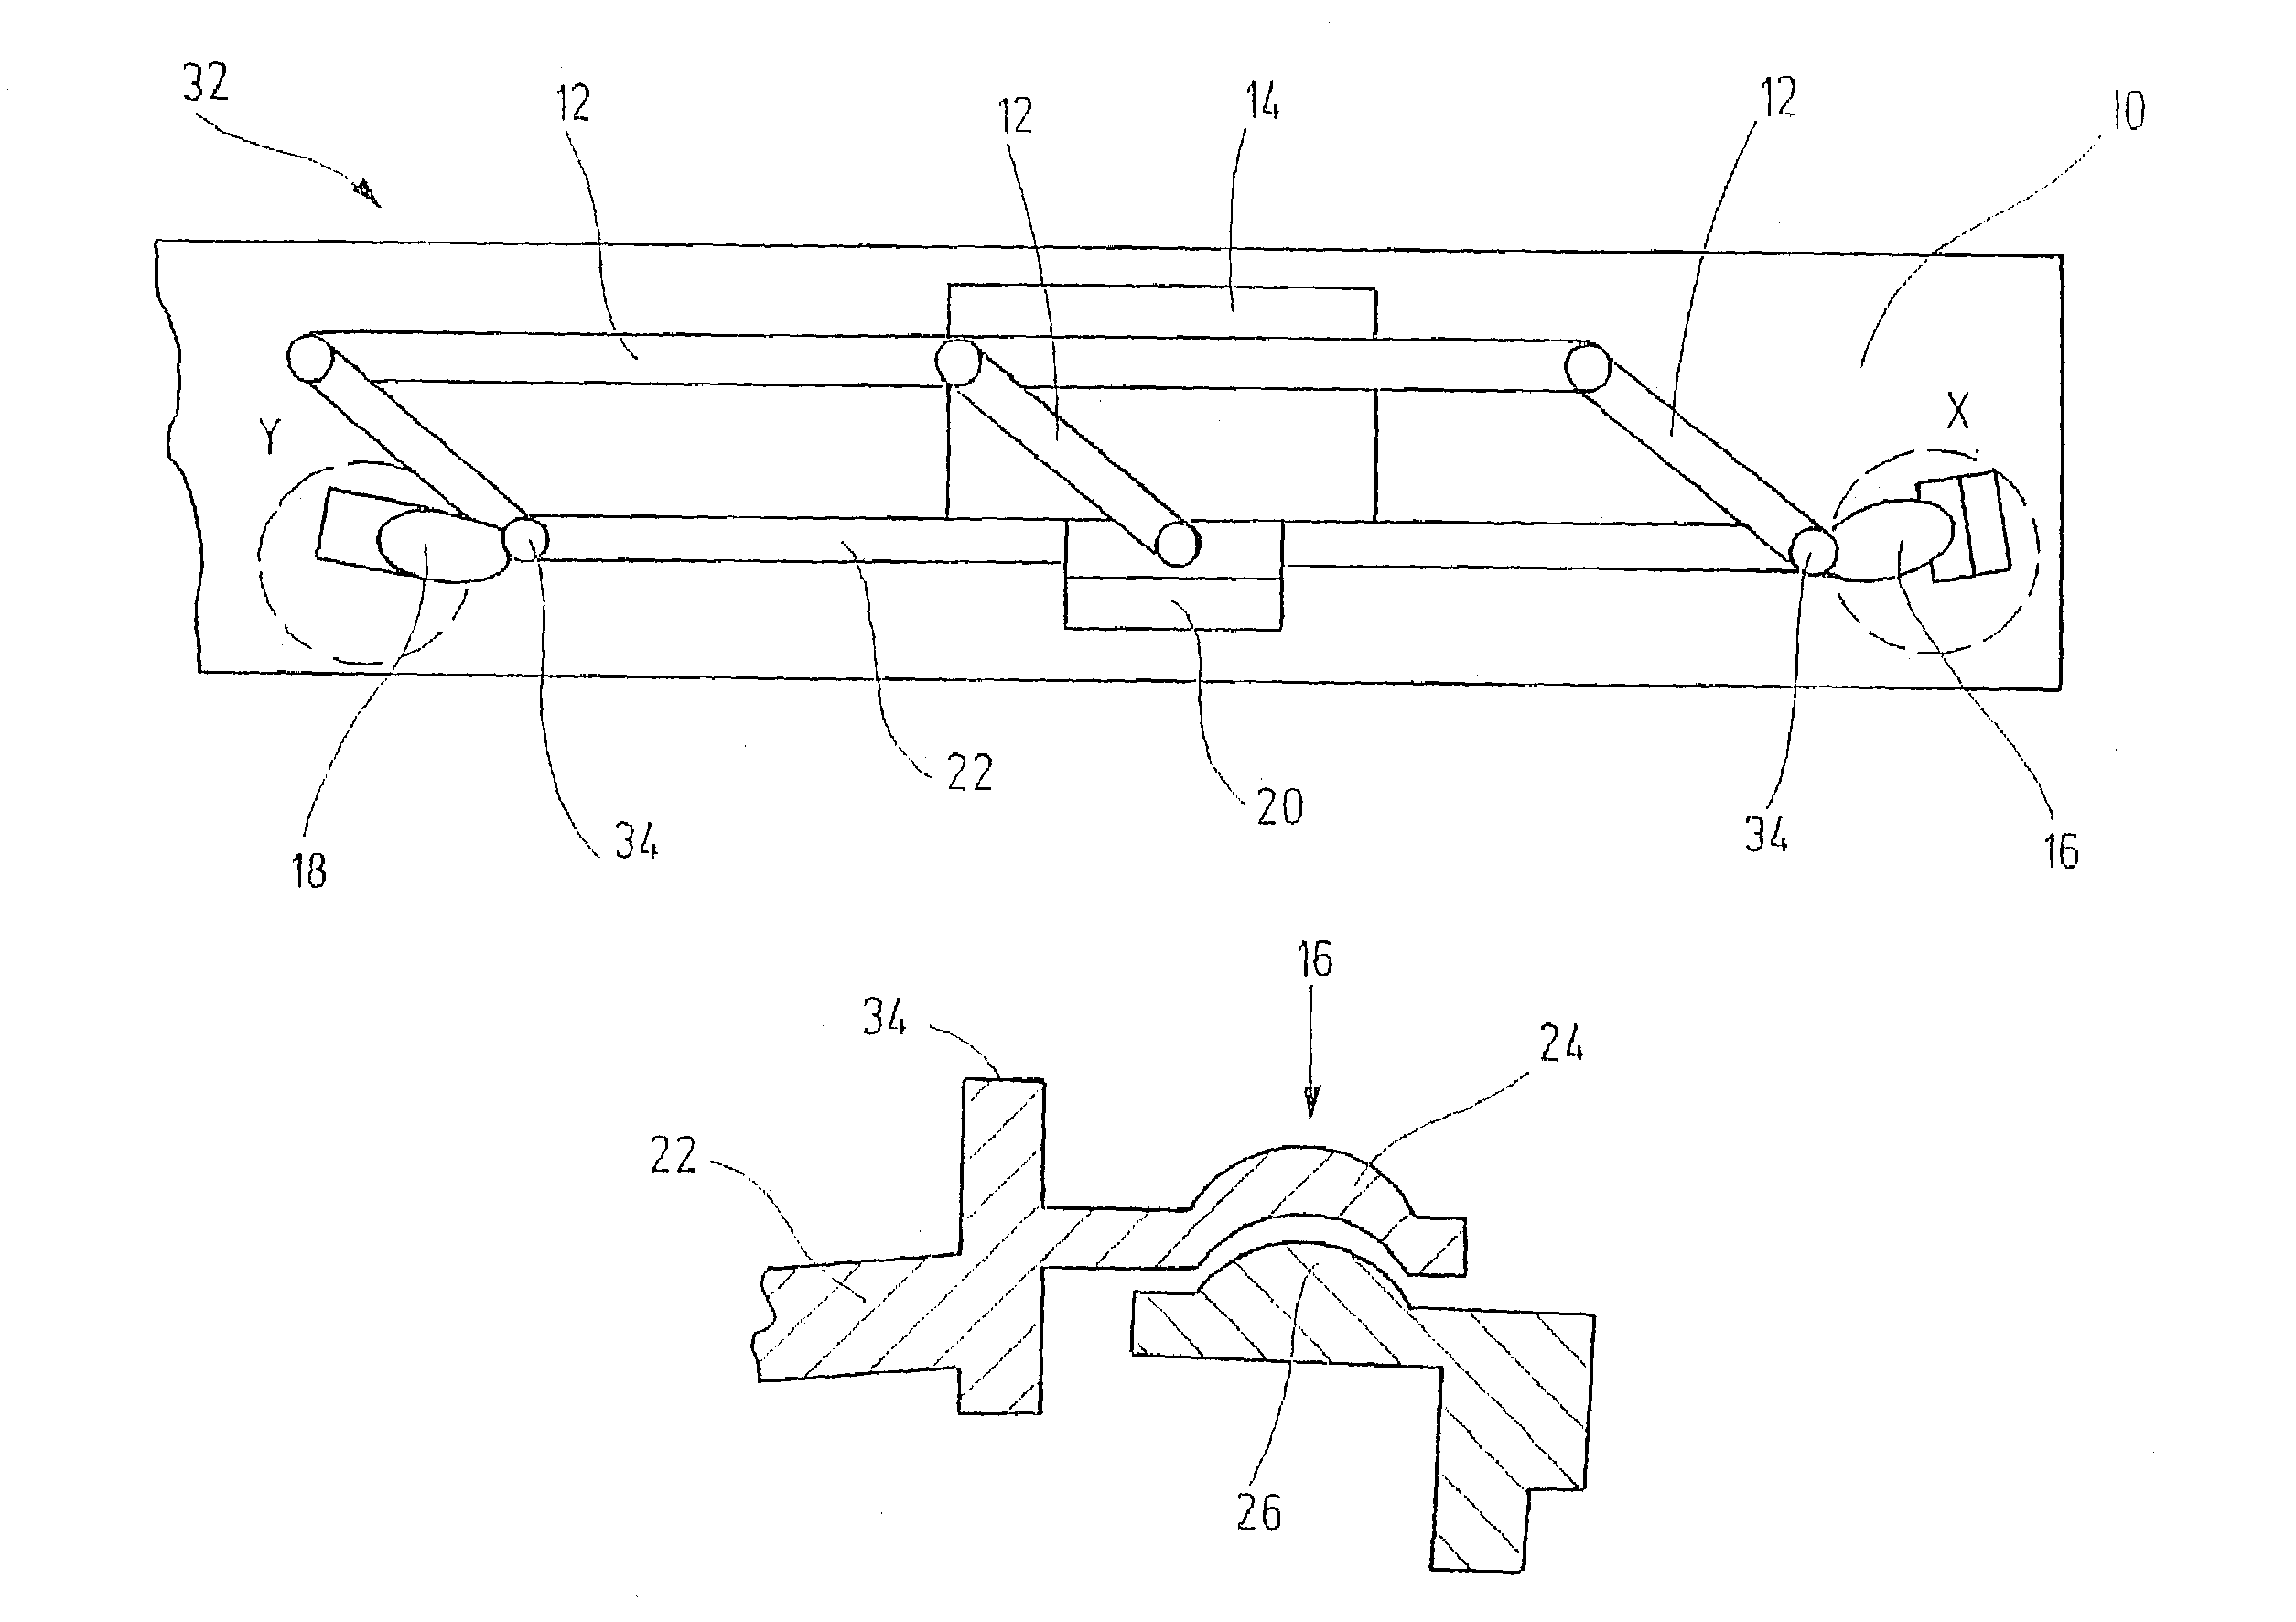 Fixing device for a windscreen wiper system